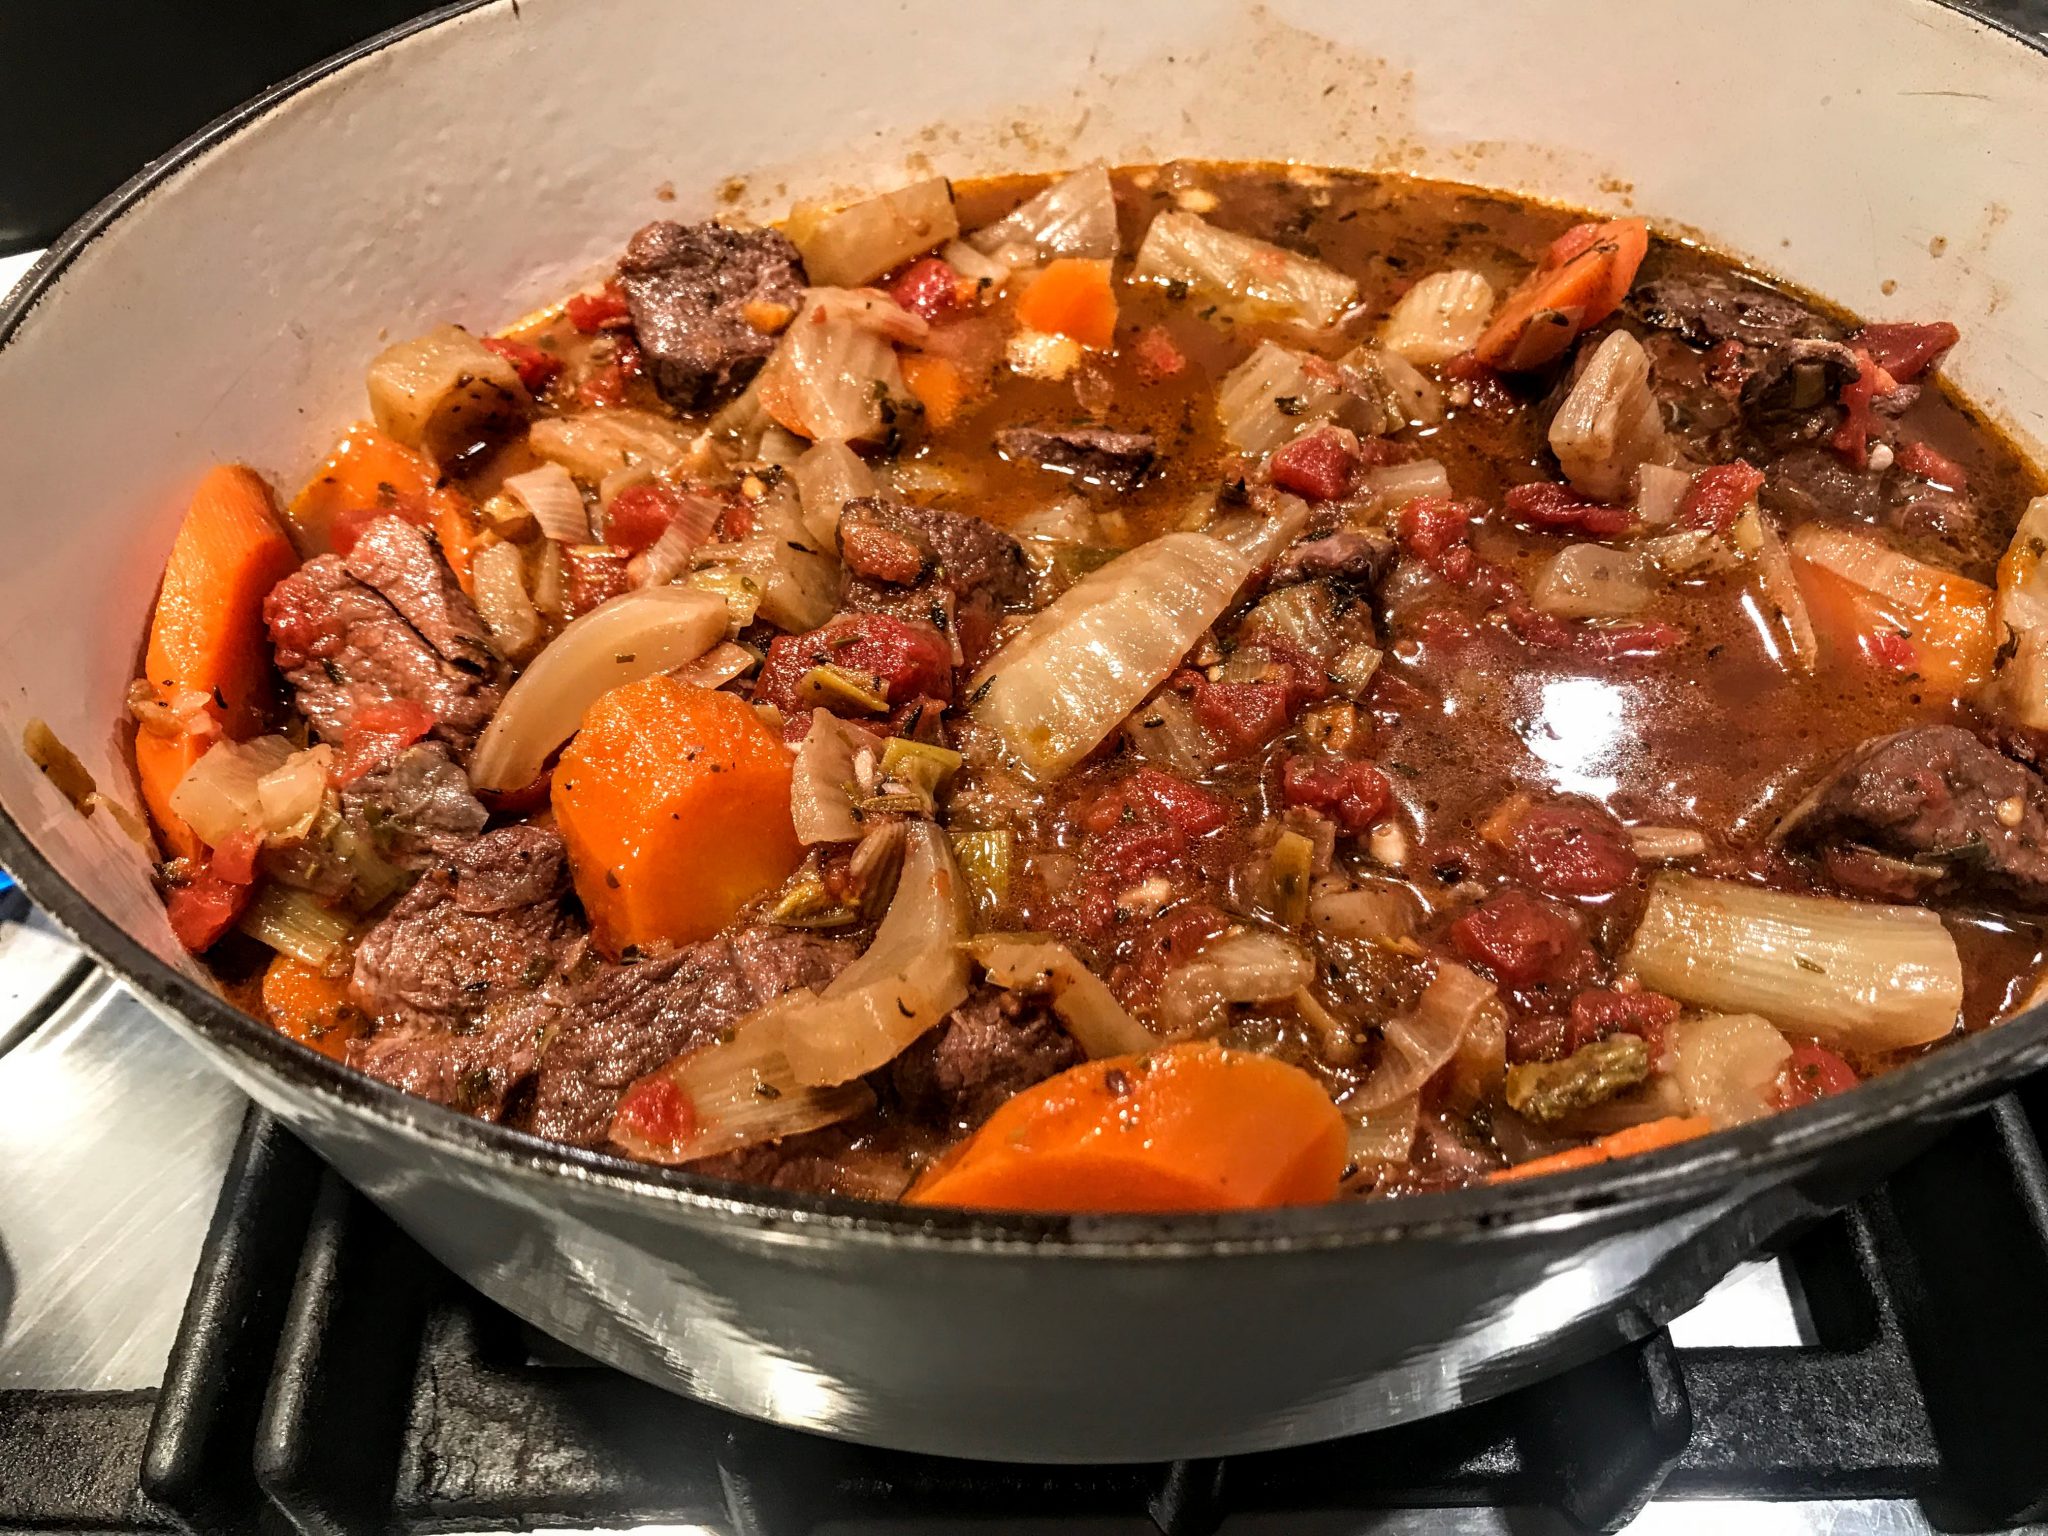 Warming Slow Cooked Lamb Ragout for Cold Winter Nights | Betty Rosbottom